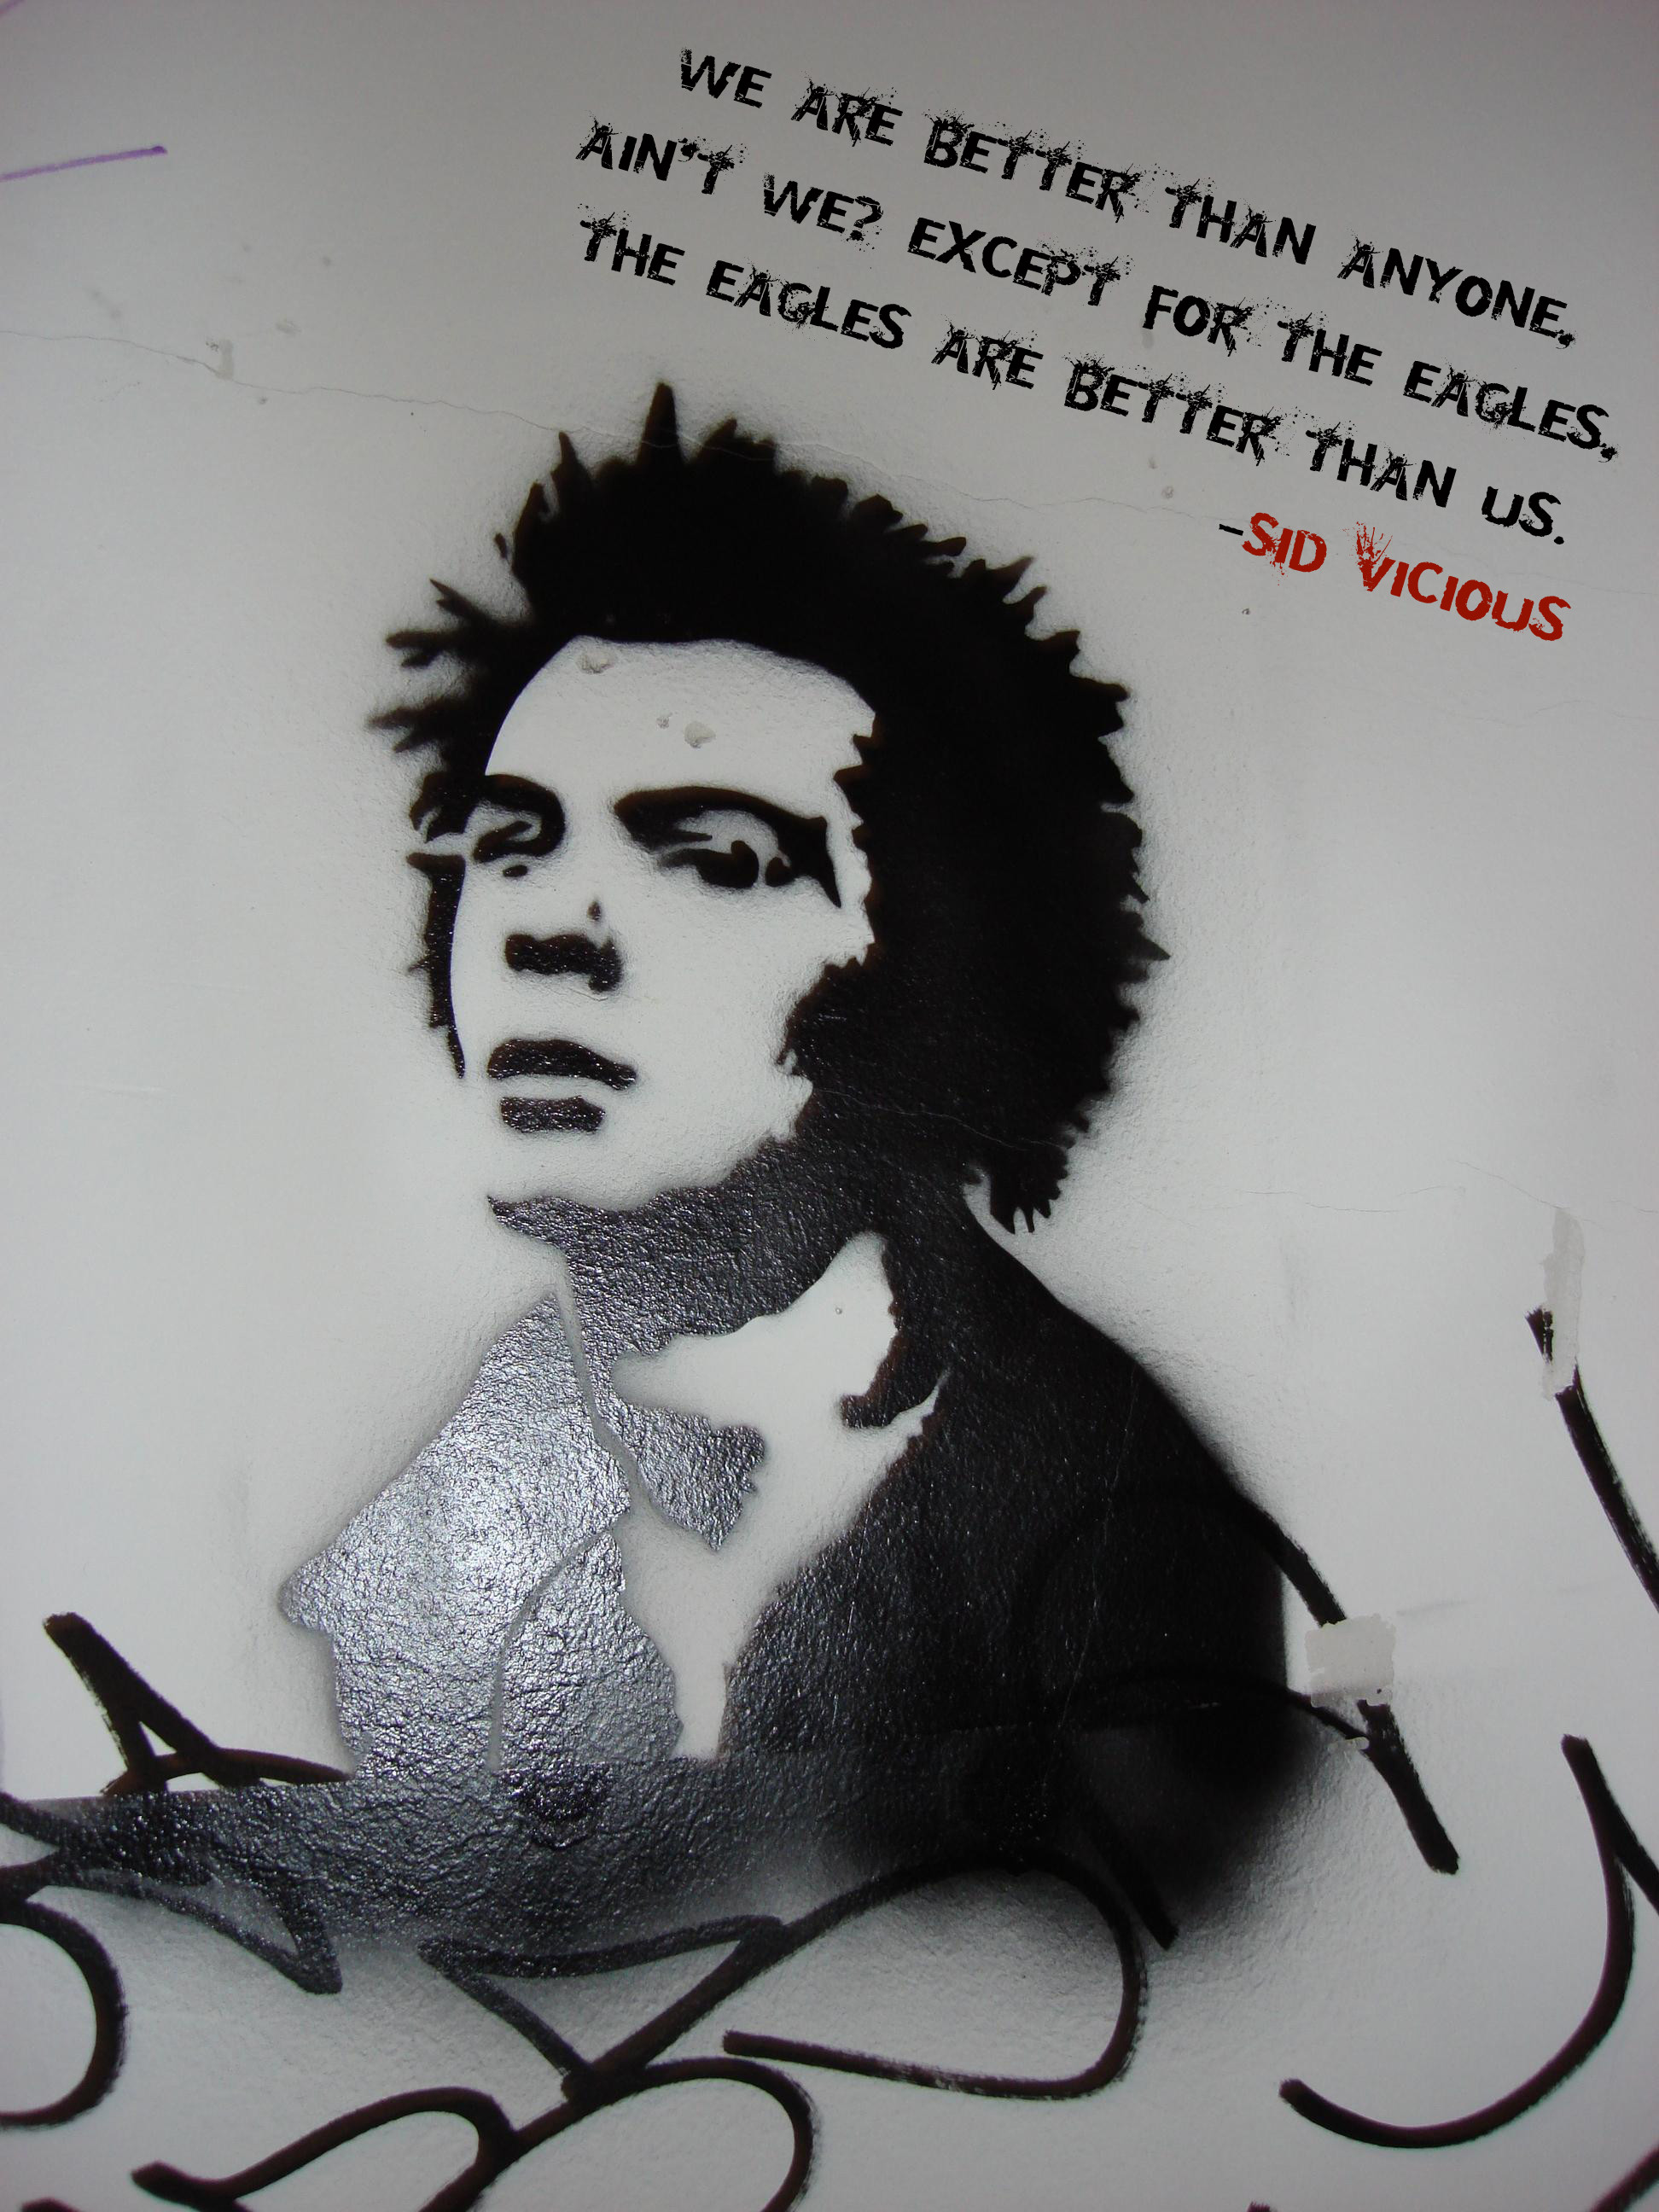 Sid Vicious's quote #5